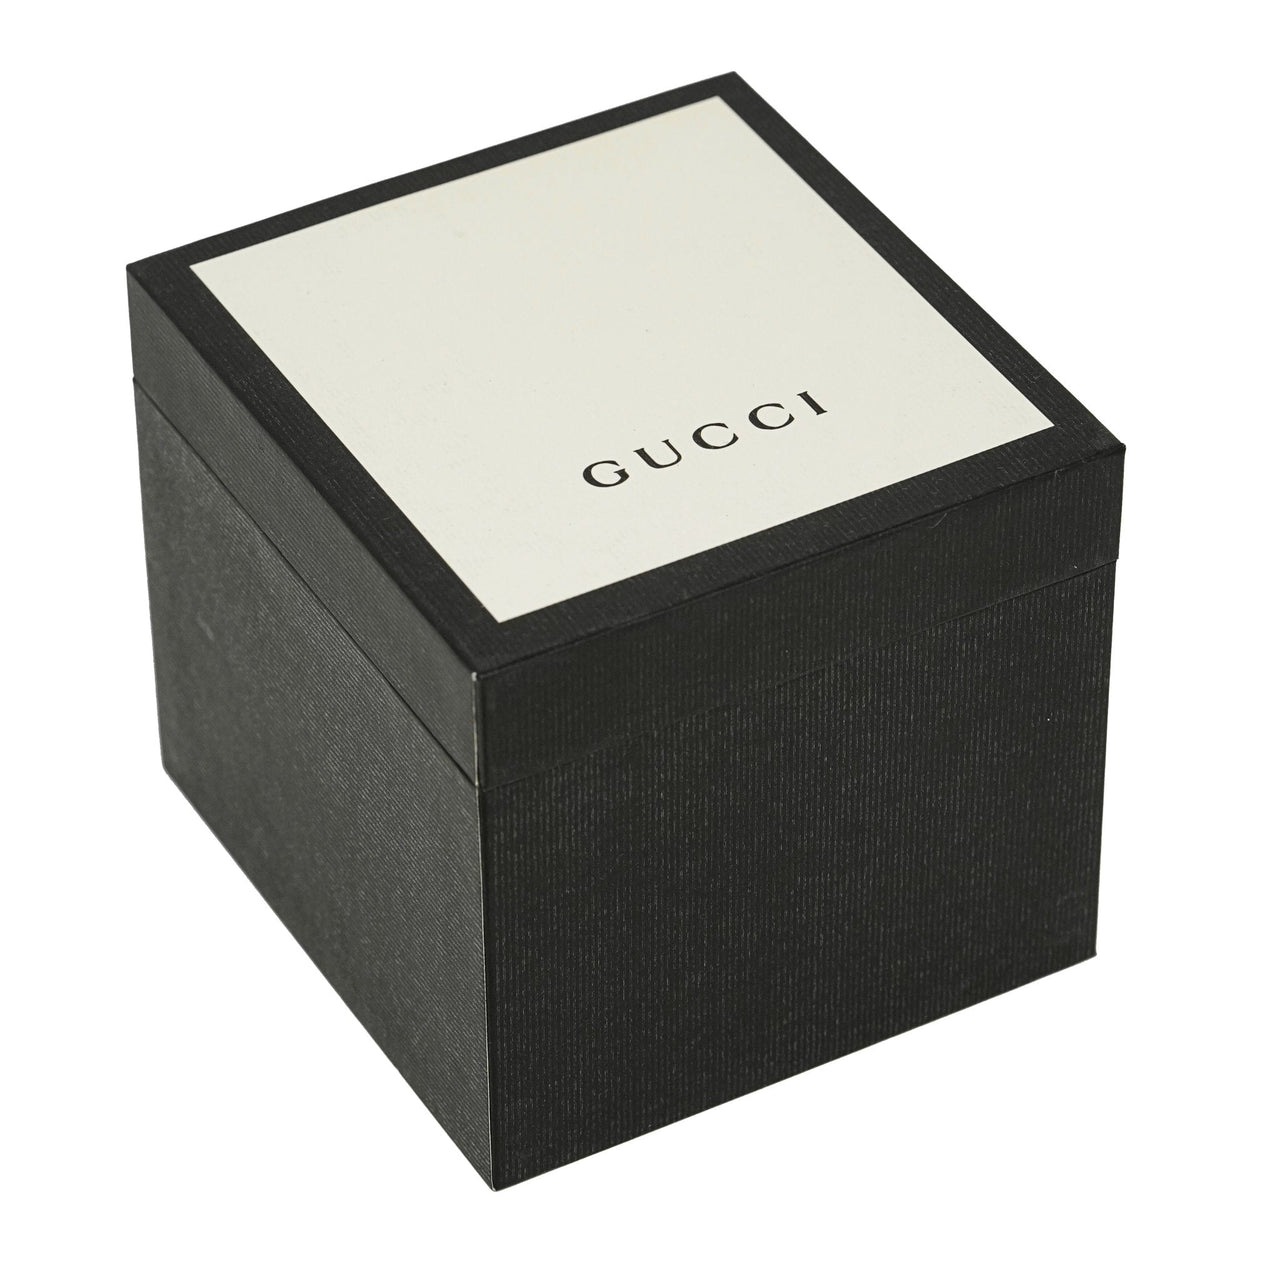 Gucci Men's Watch Dive Black Silver YA136301A - Watches & Crystals